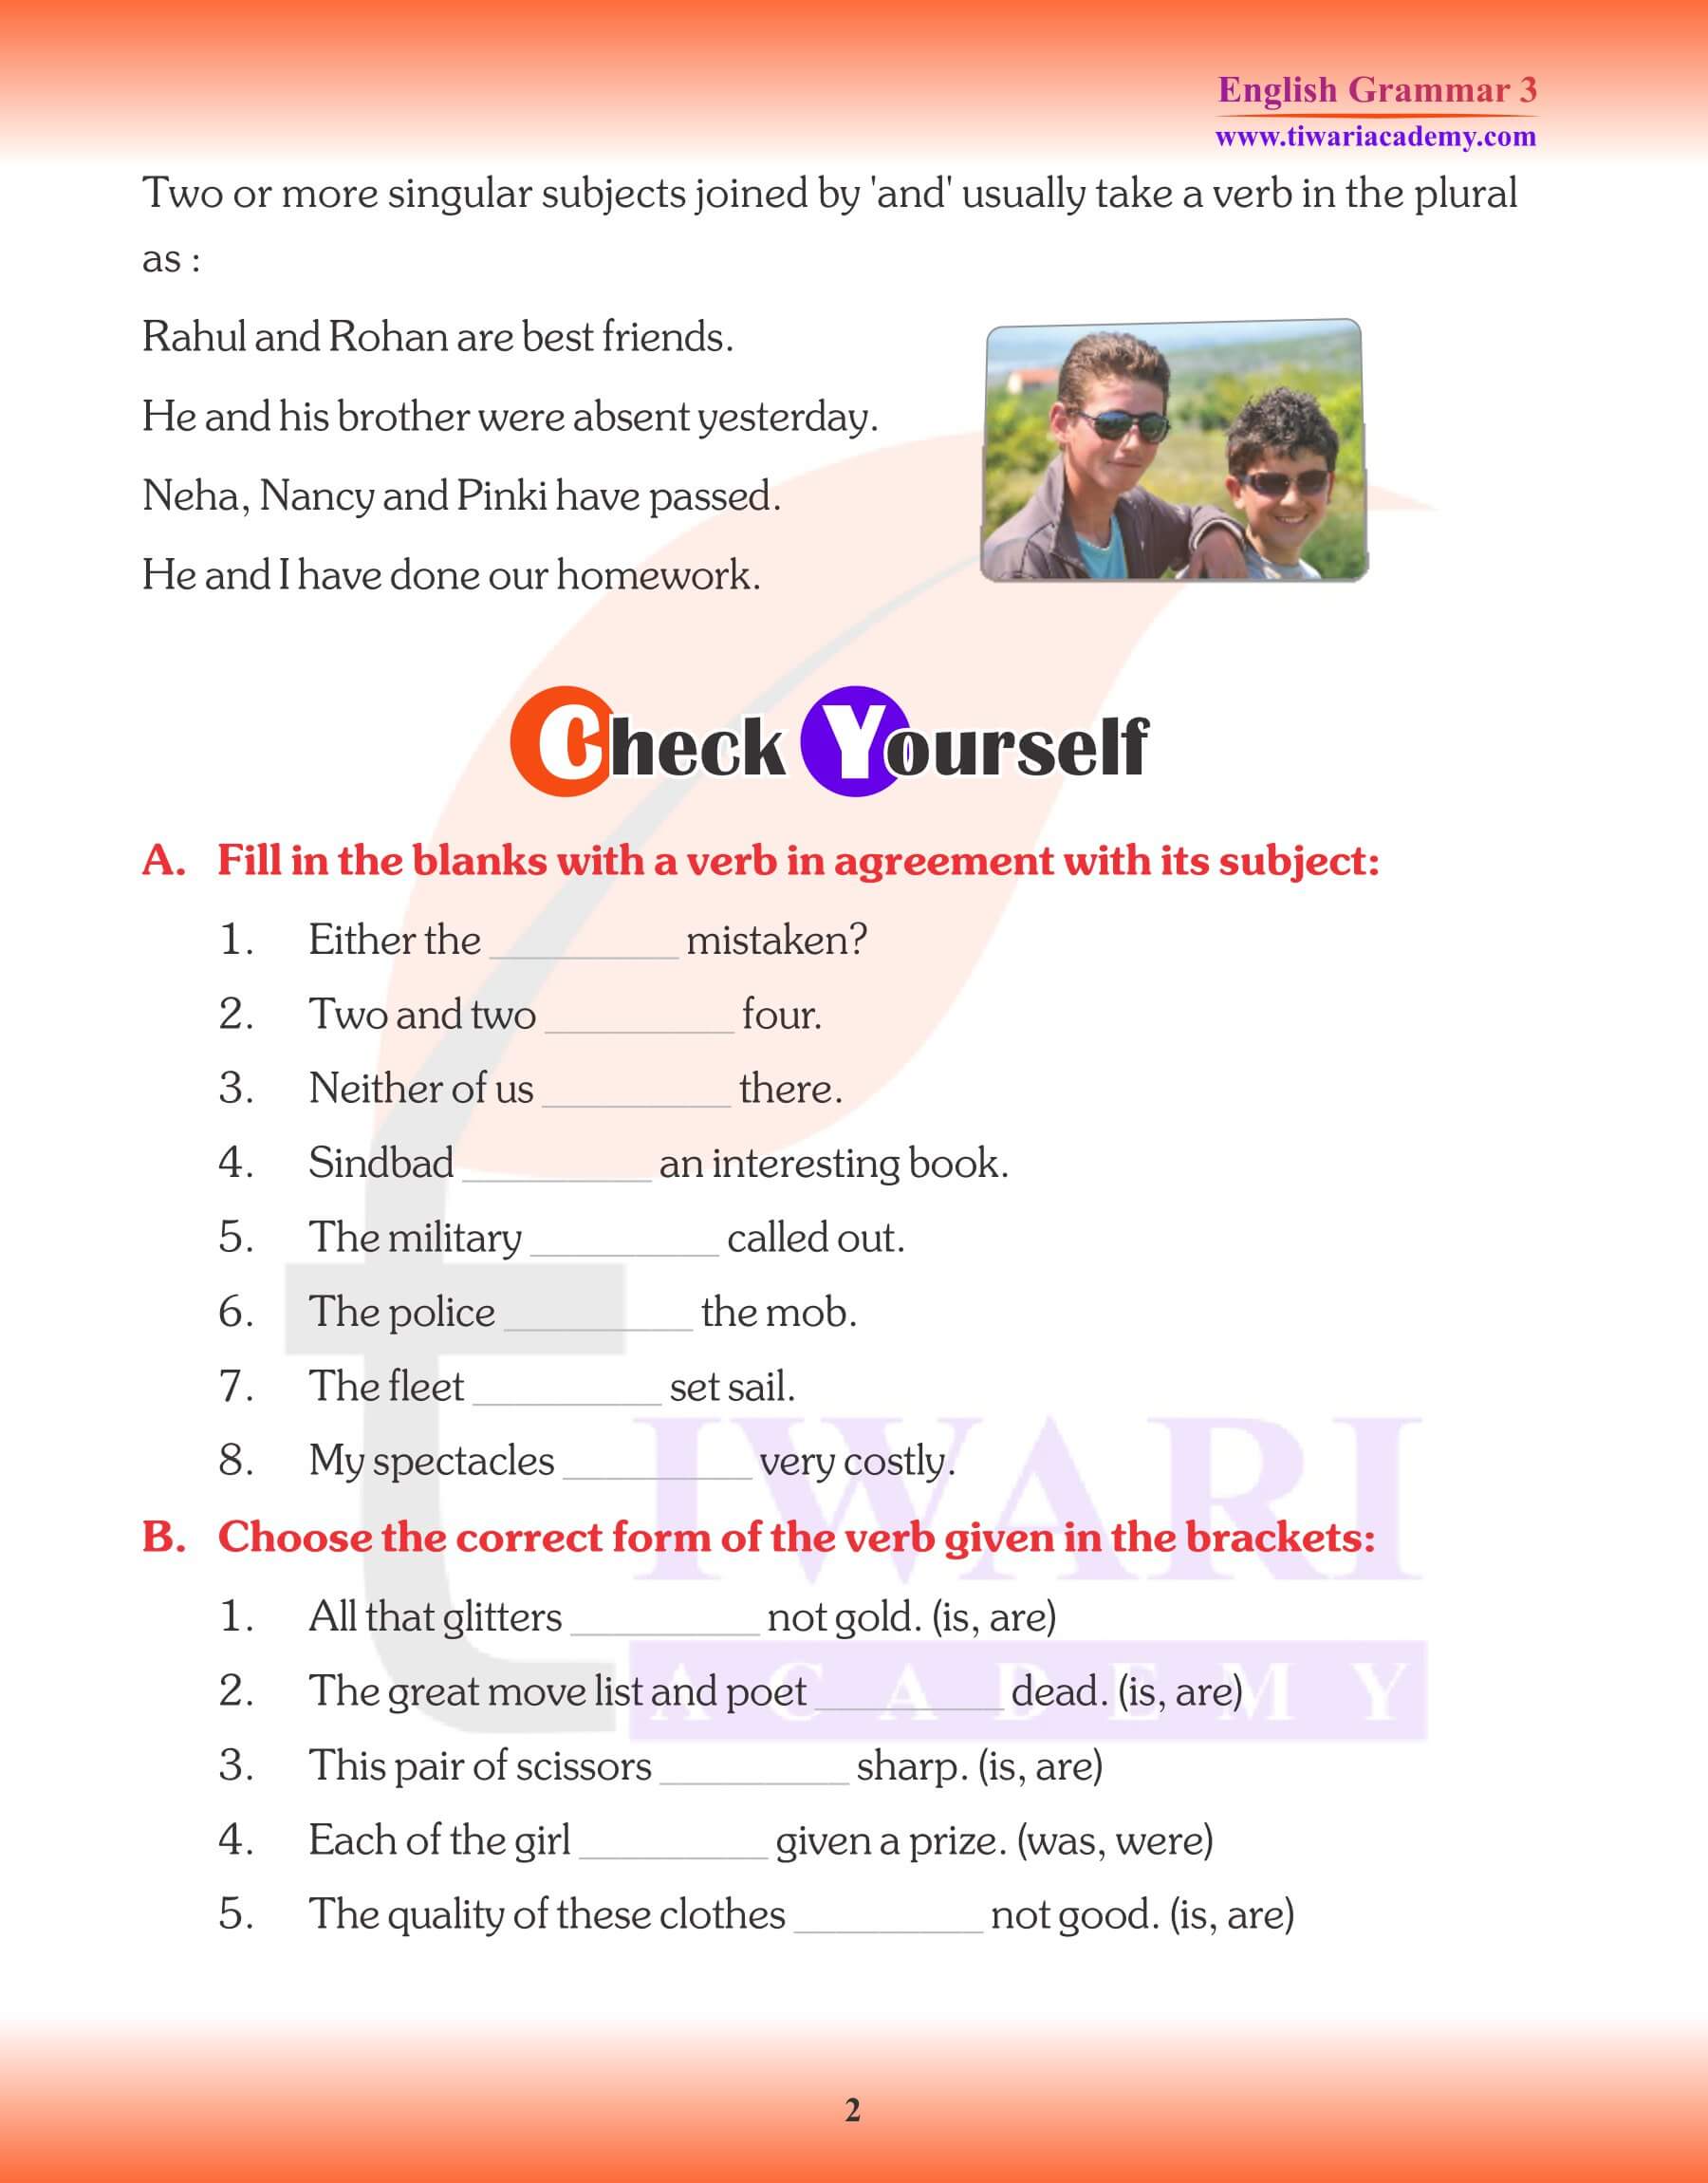 English Grammar for Grade 3 Statements and its Type